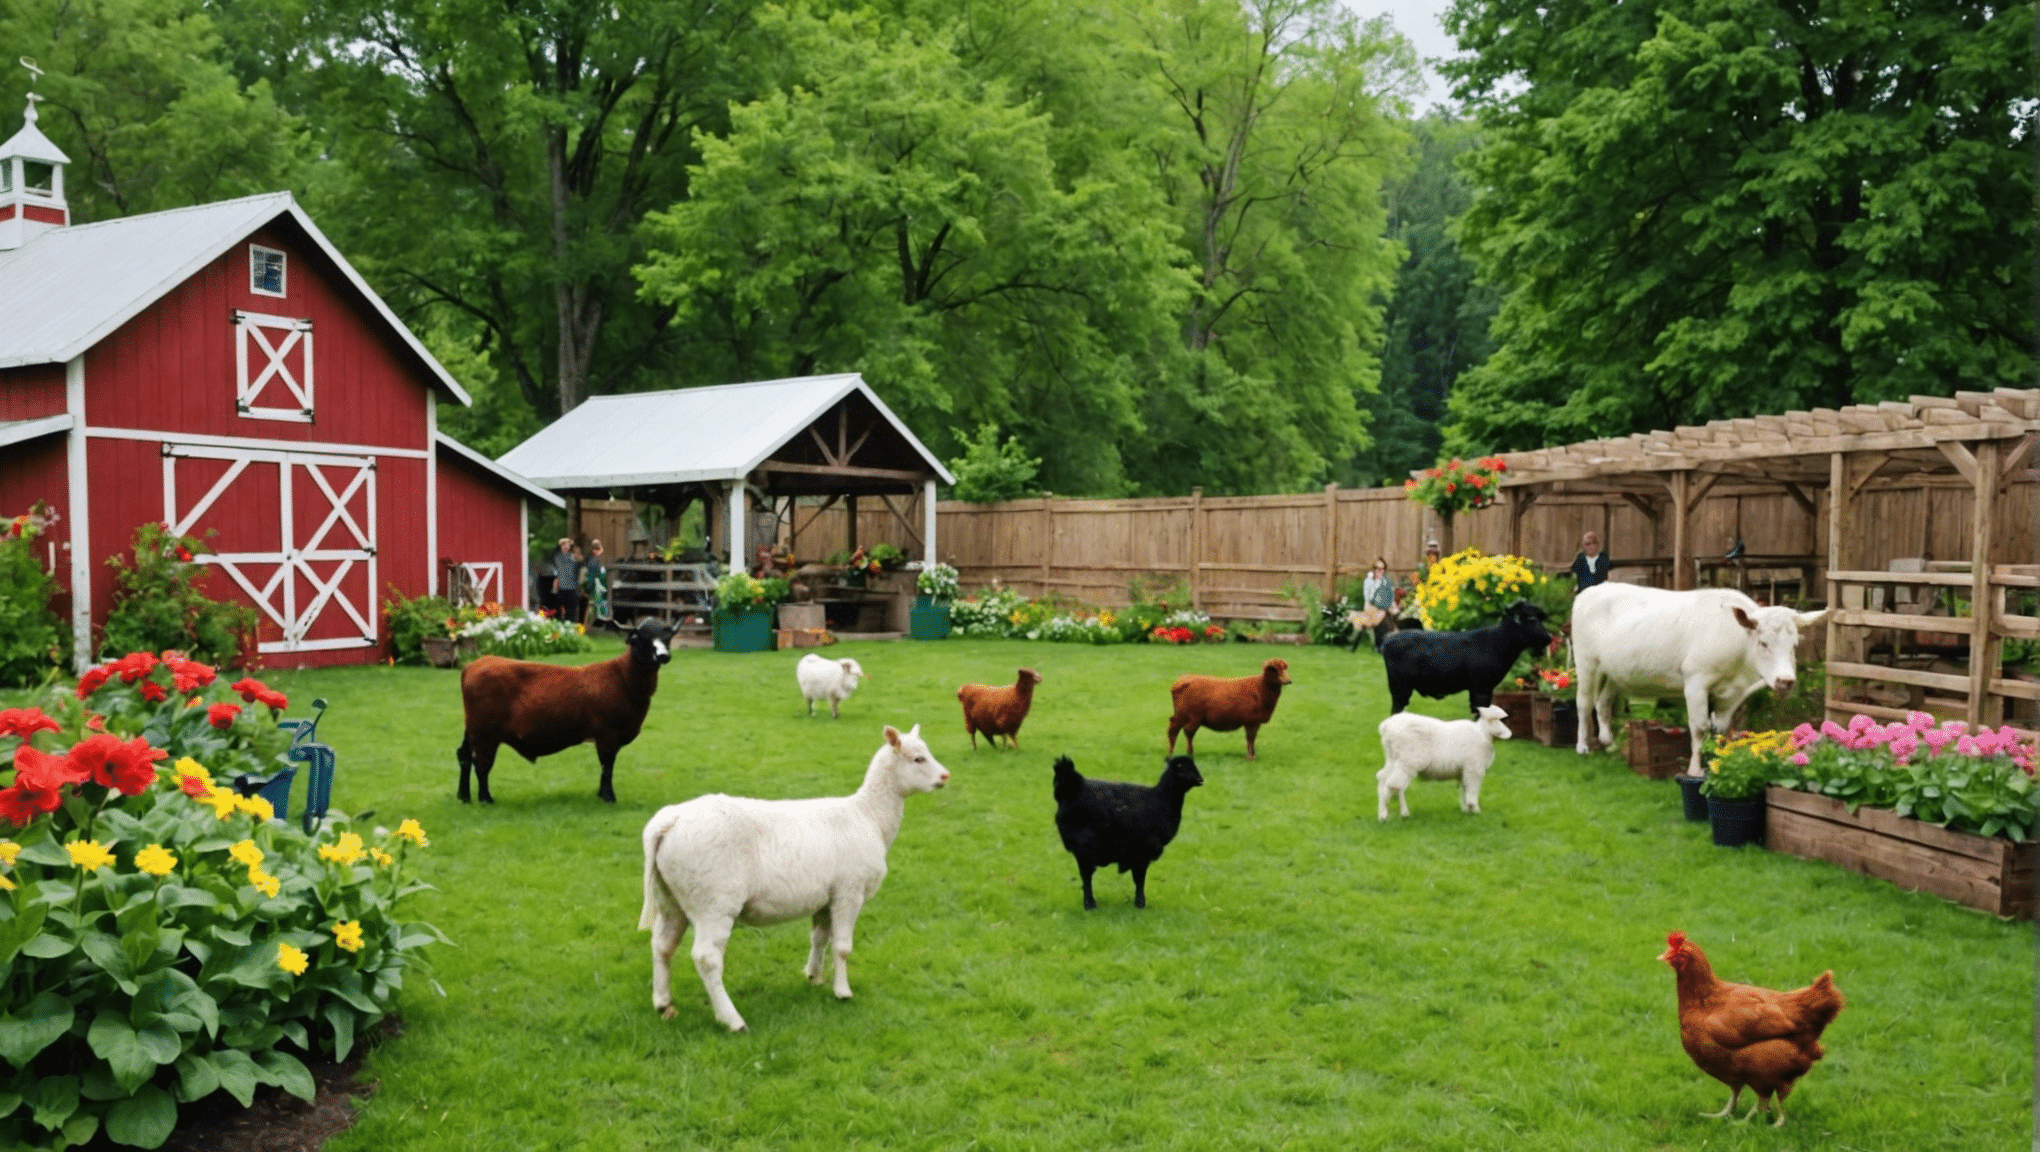 learn how to host a fun and engaging backyard farm animals show with our step-by-step guide. get tips on setting up the event, showcasing the animals, and entertaining your guests.